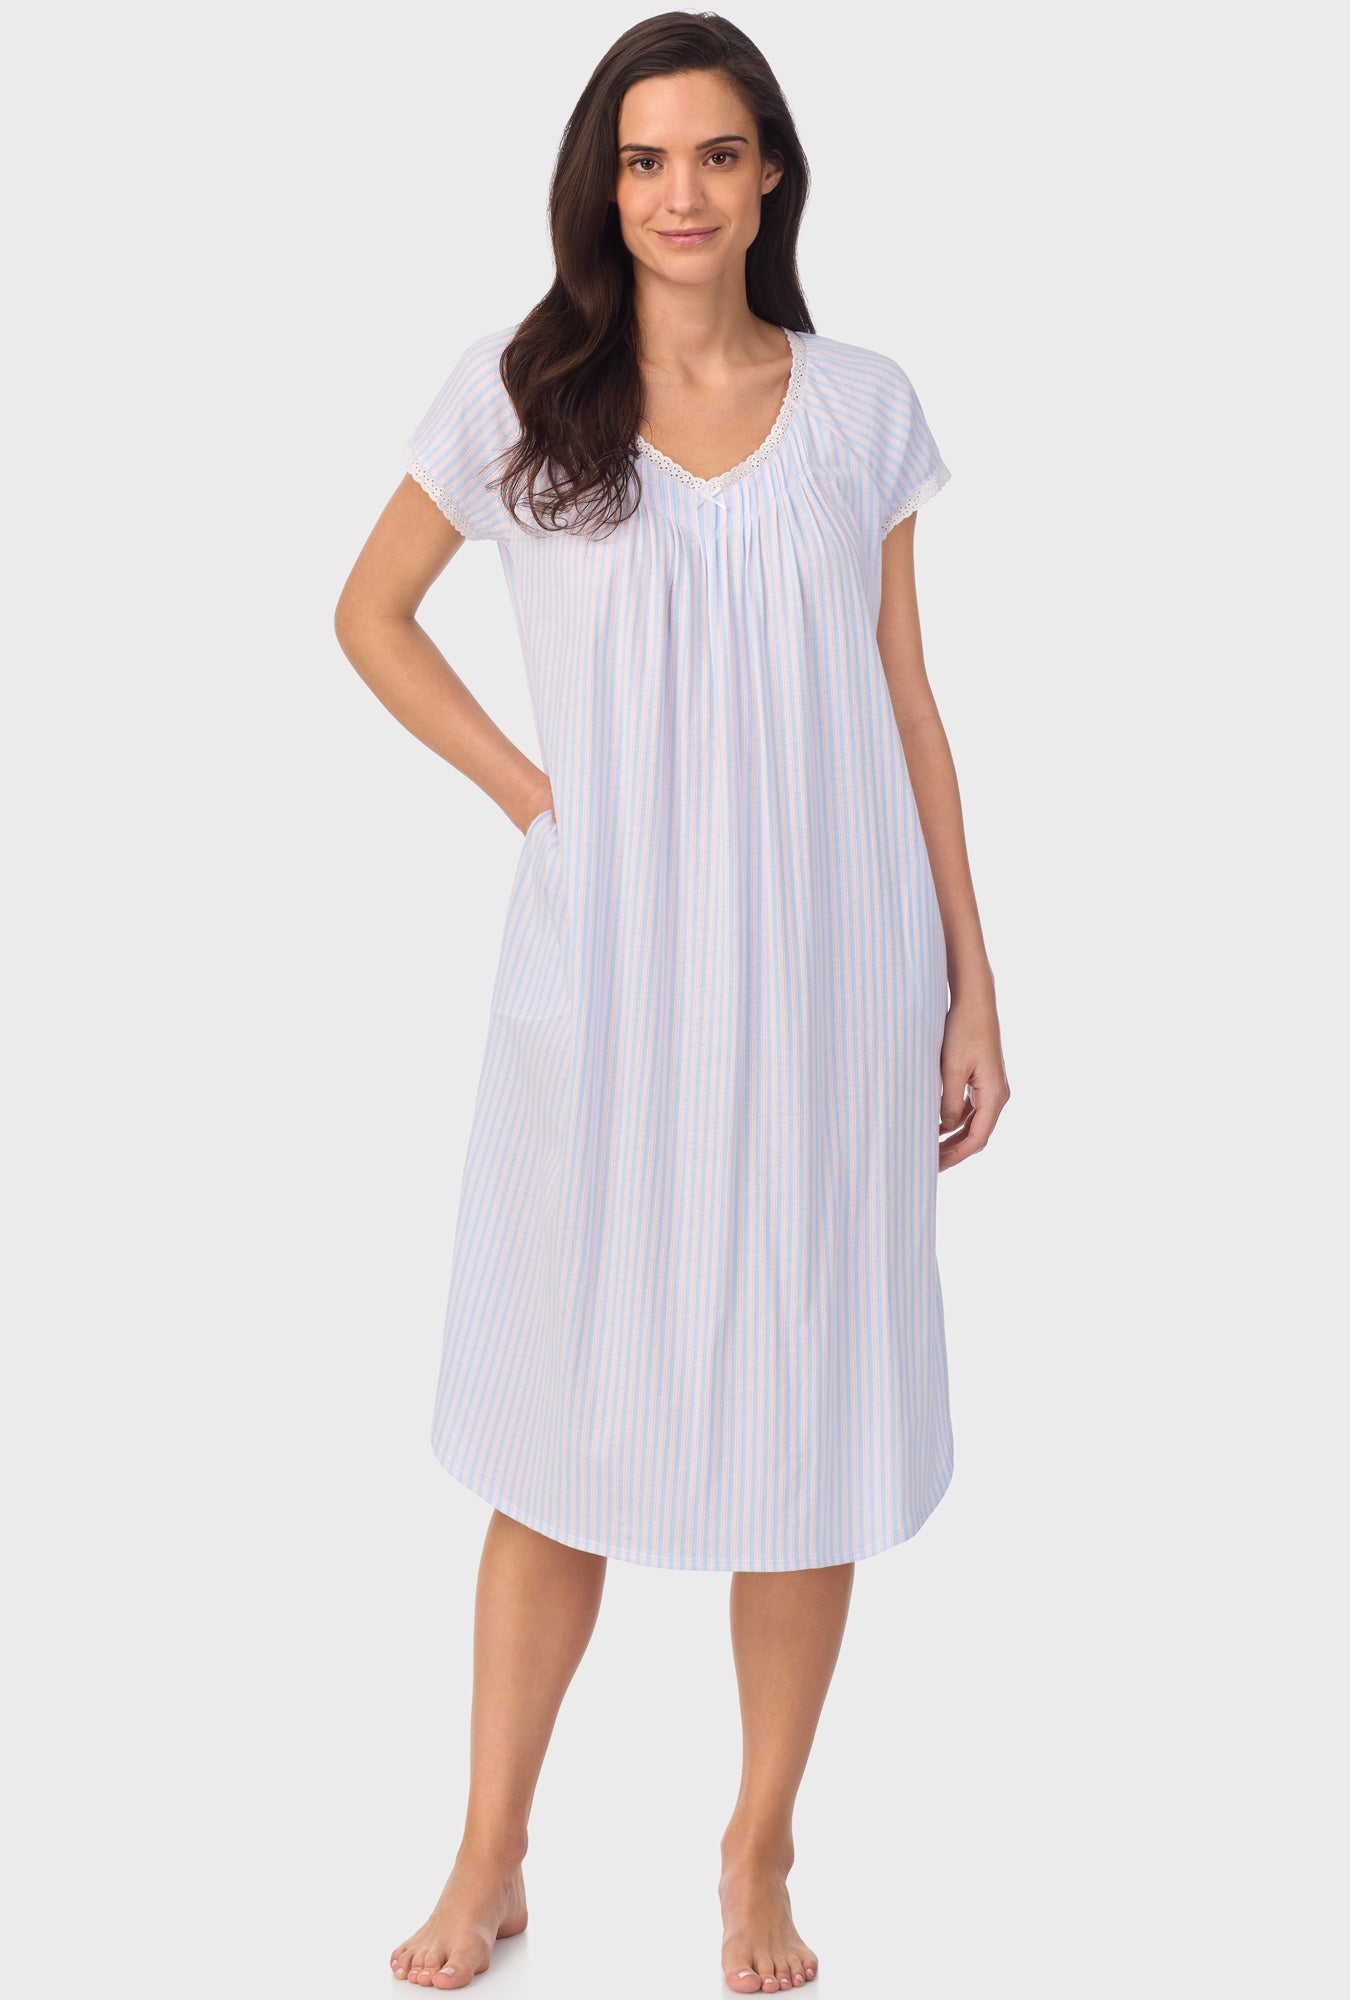 A lady wearing white short Sleeve Blossom Stripes Cap Sleeve Nightgown with Cotton Blue print